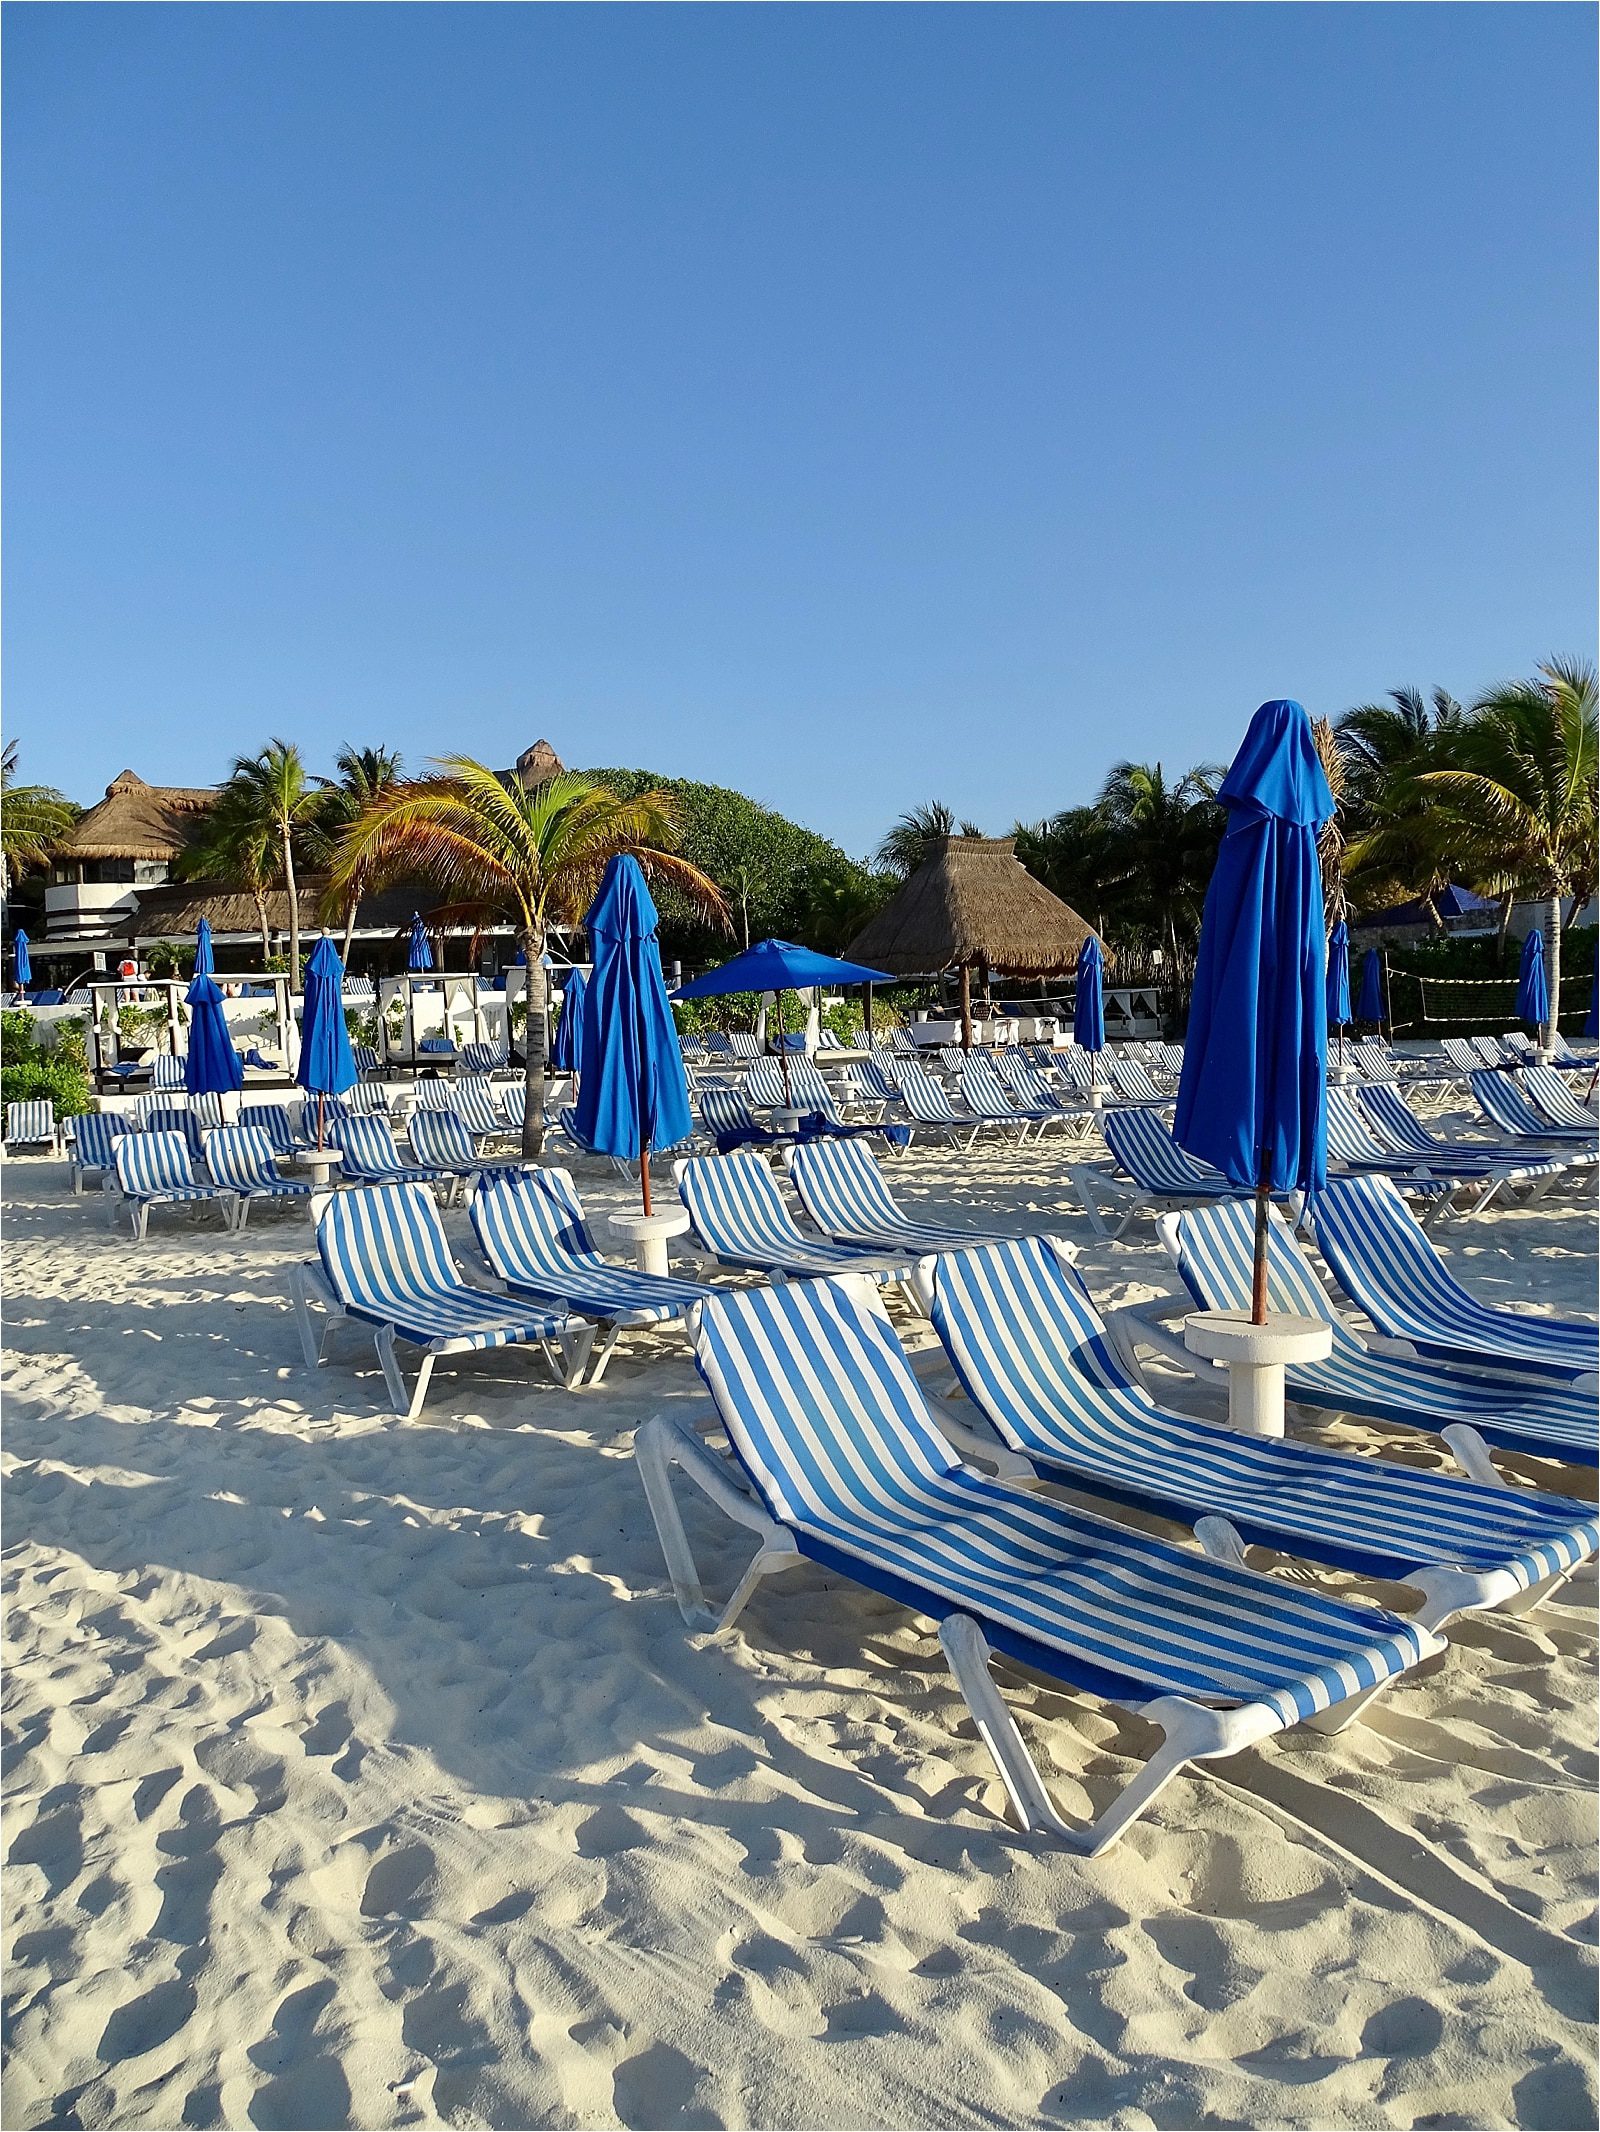 The Reef Playacar an All Inclusive Resort in Mexico for Your Destination Wedding or Honeymoon | Hill City Bride Virginia Wedding Blog